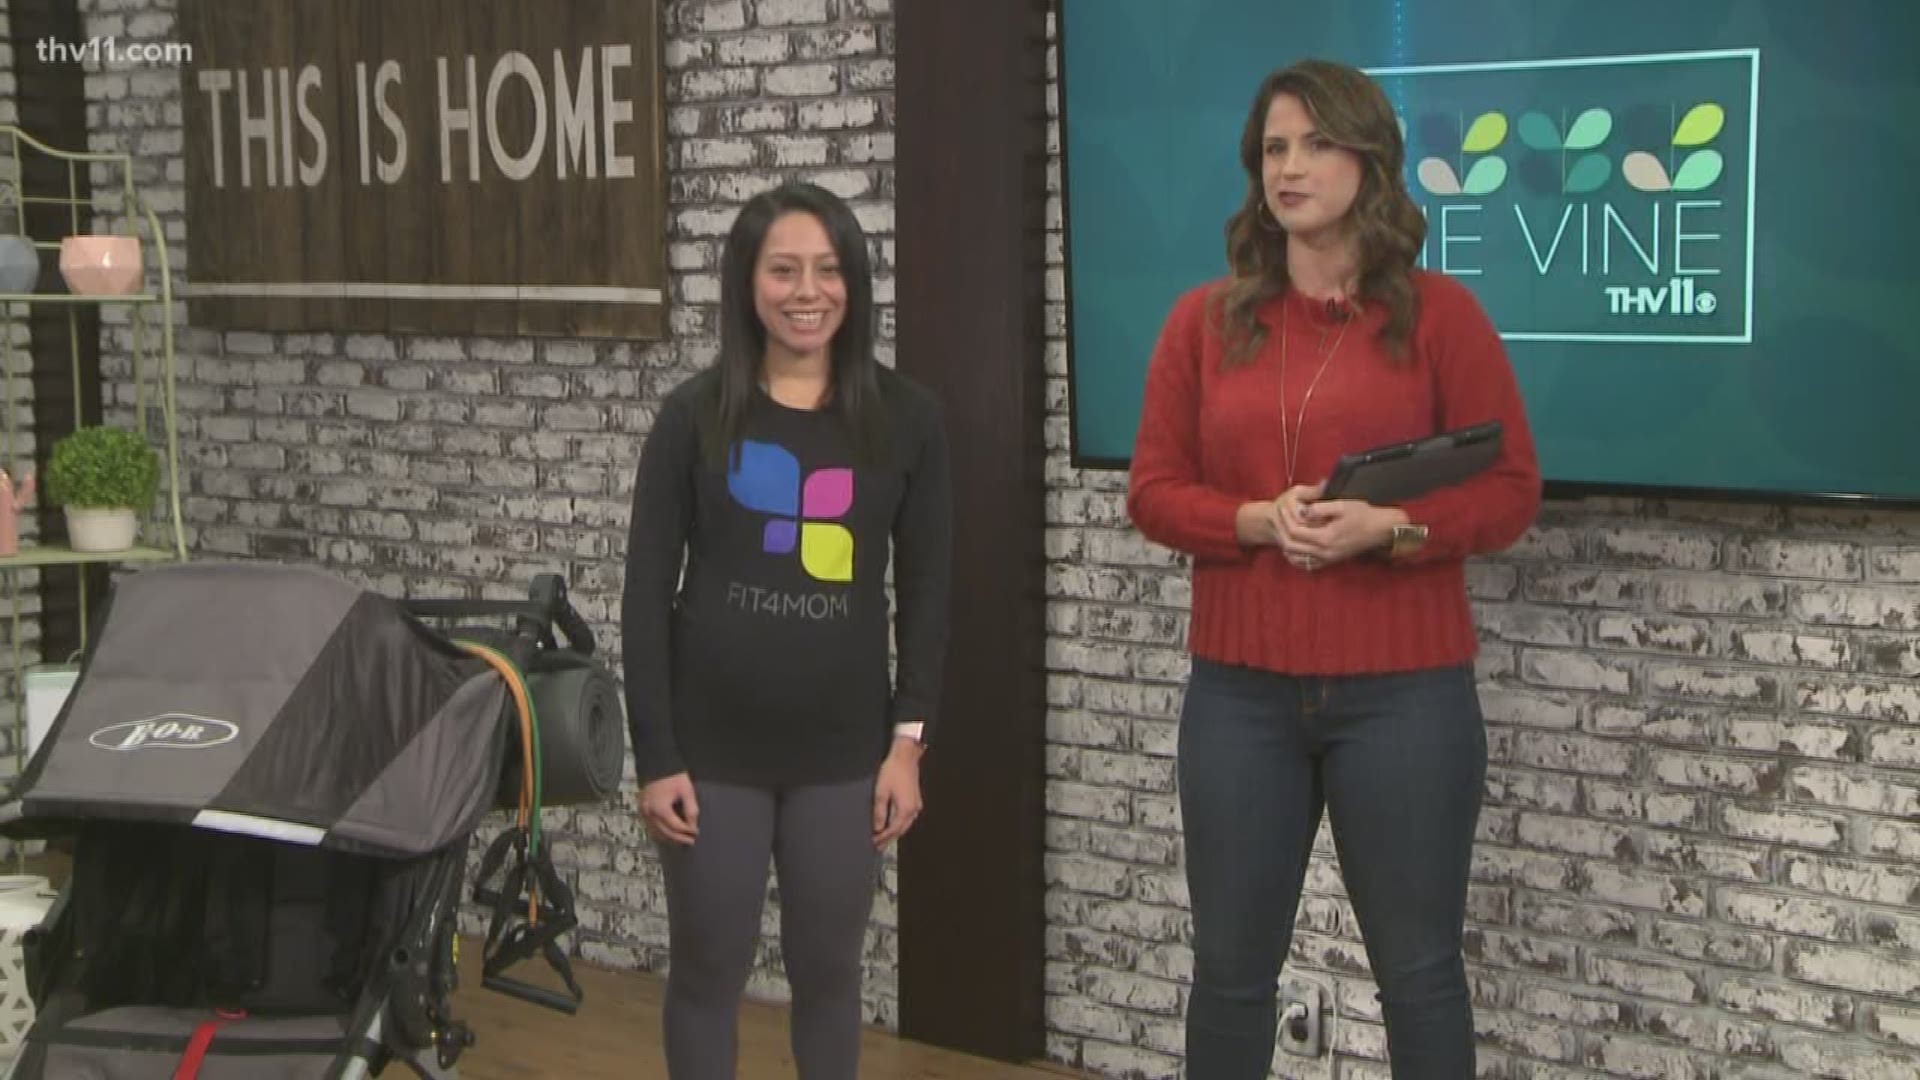 Fit4Mom is a fitness program for mothers of all ages. Owner Melissa Smith stopped by The Vine to share how Arkansas moms can get involved.